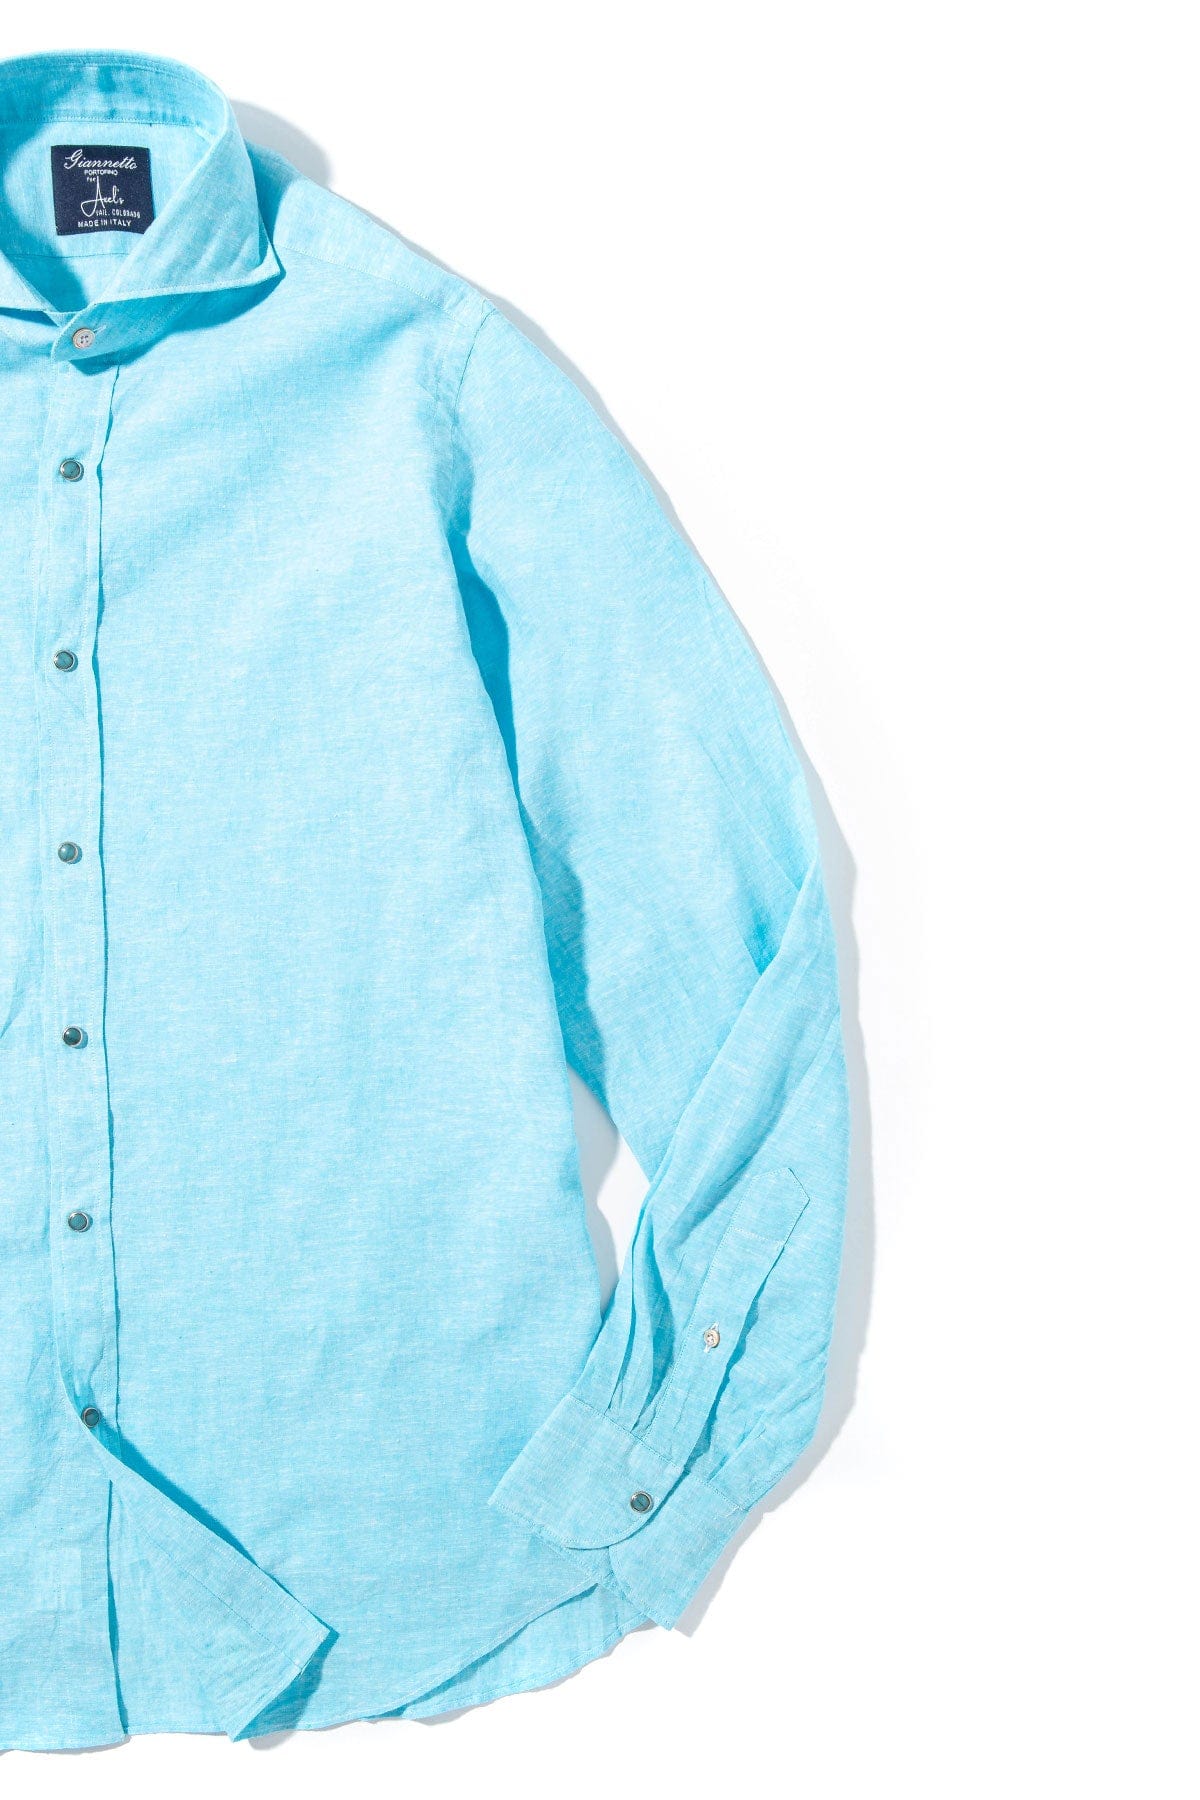 Mach Linen Cotton Shirt in Turquoise - AXEL'S